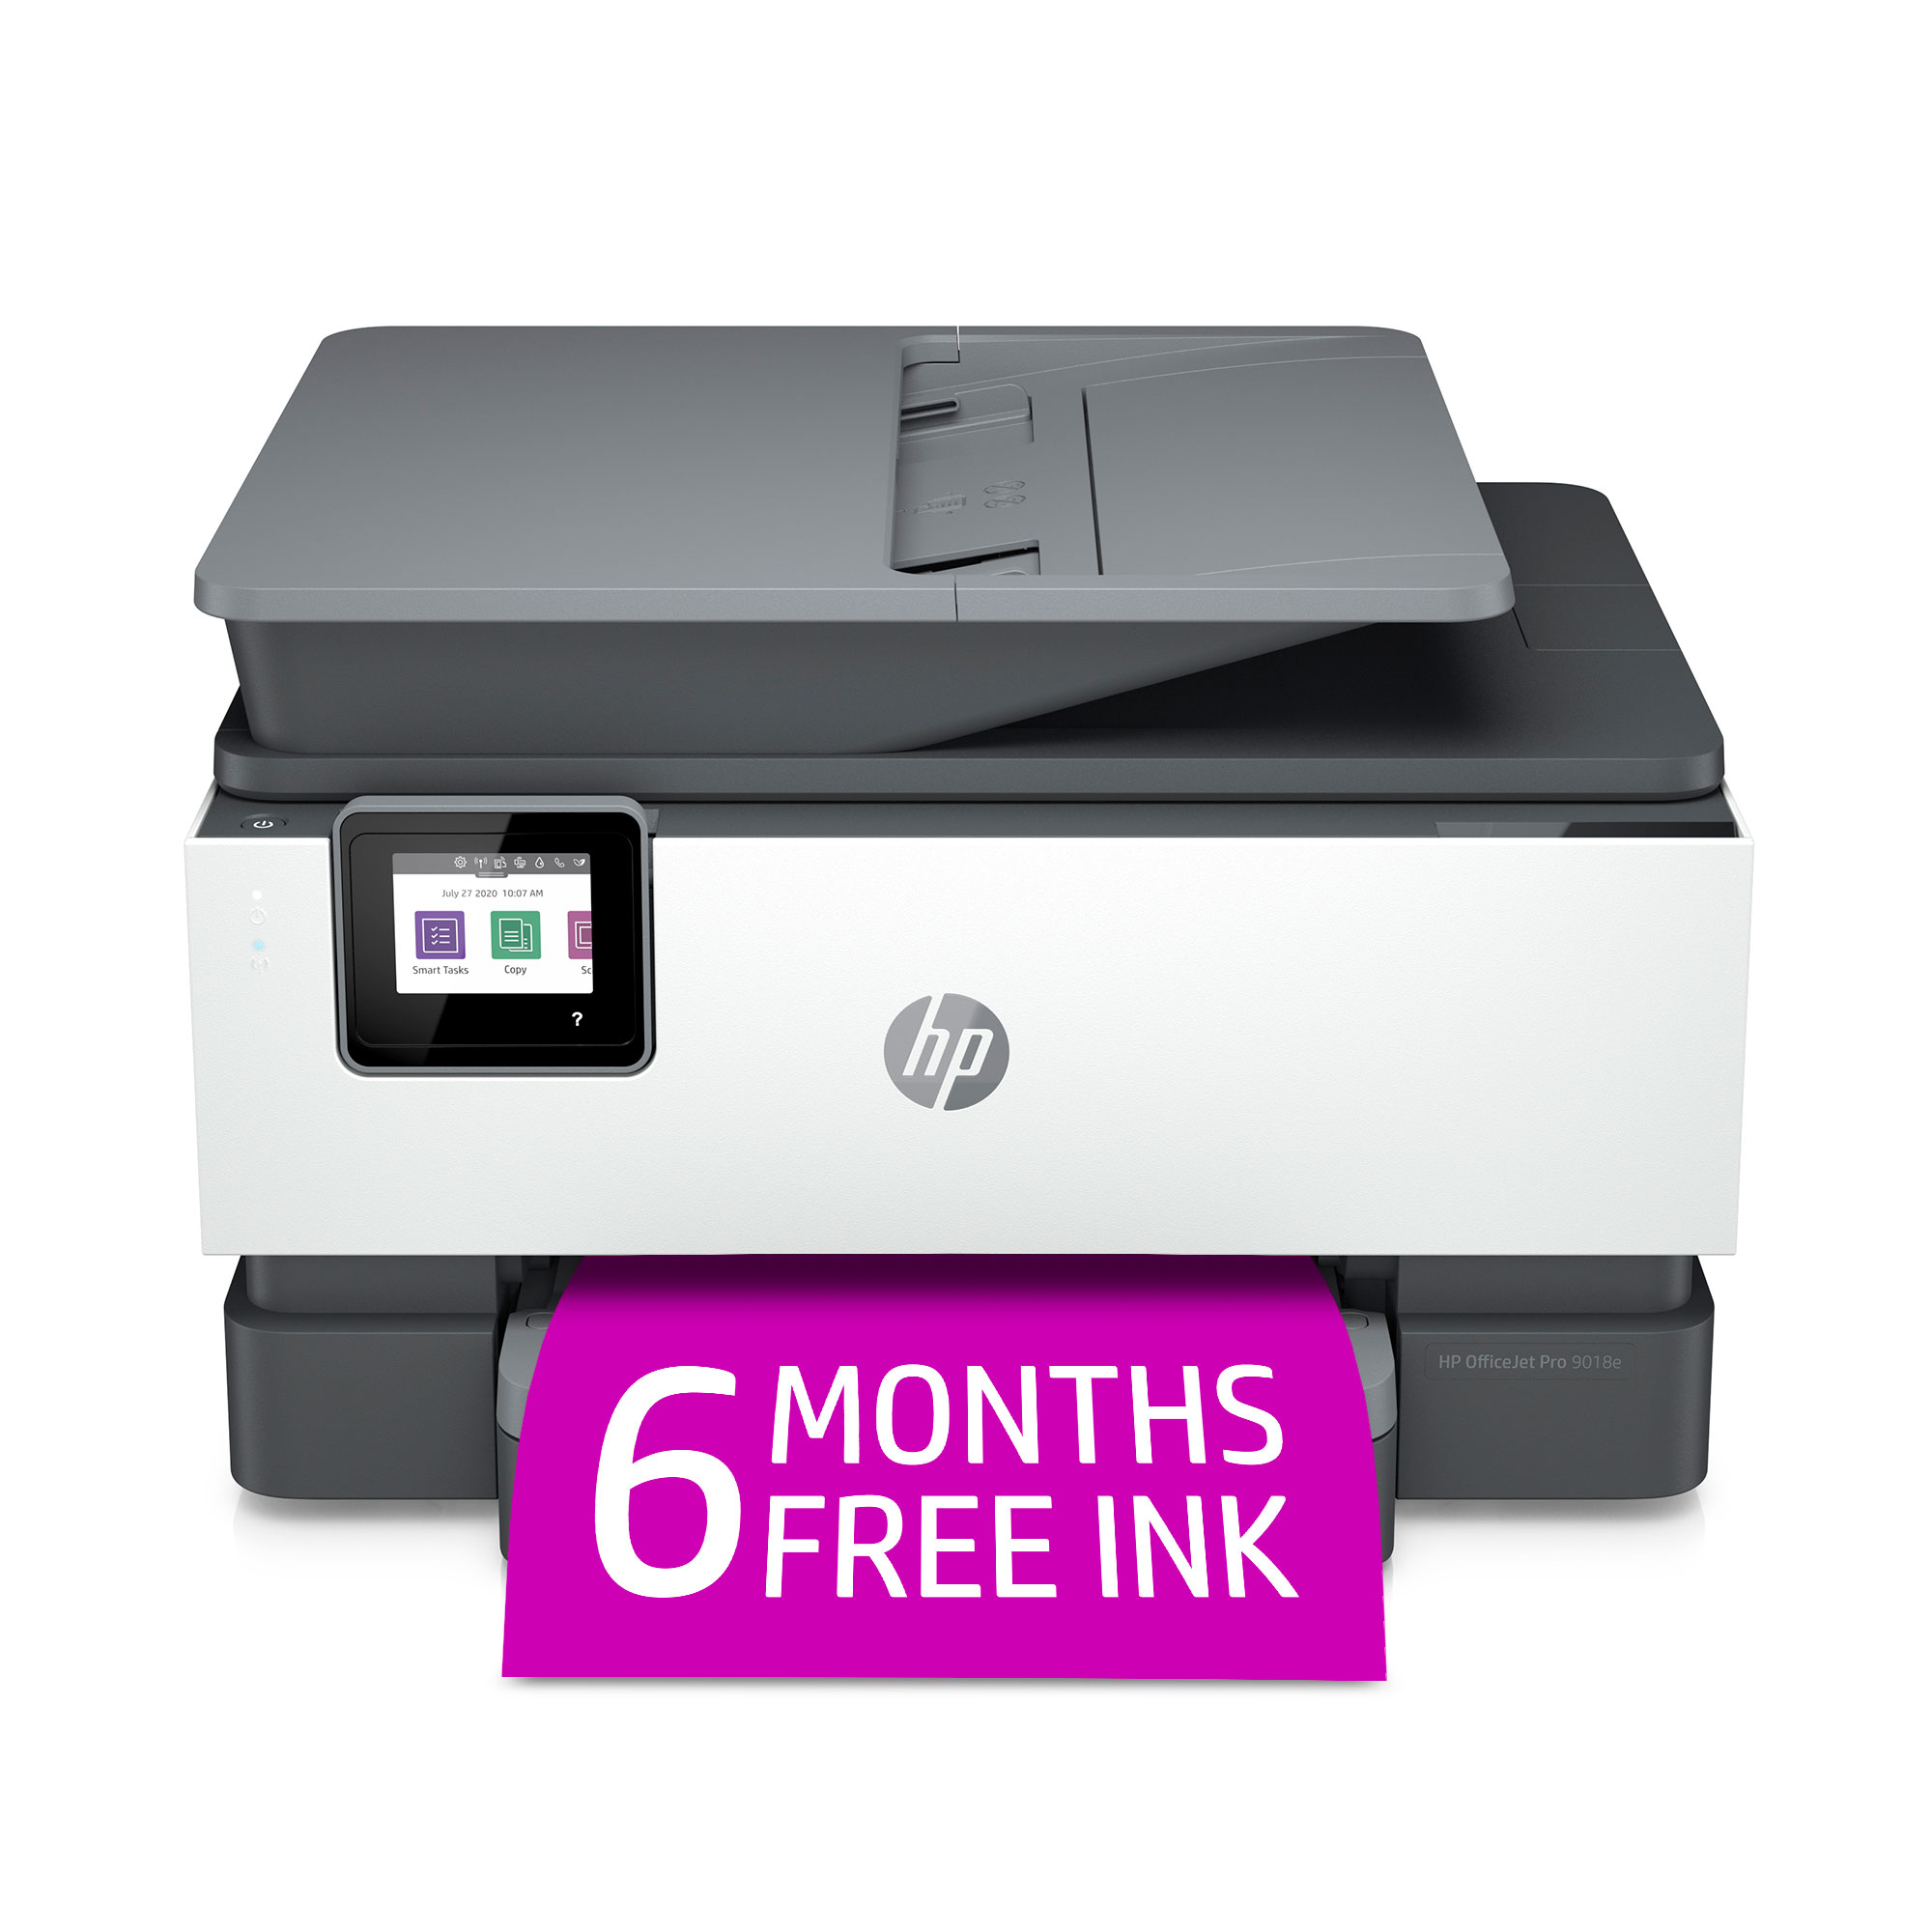 HP OfficeJet Pro 9010 Wireless Color All-in-One Printer Duplex